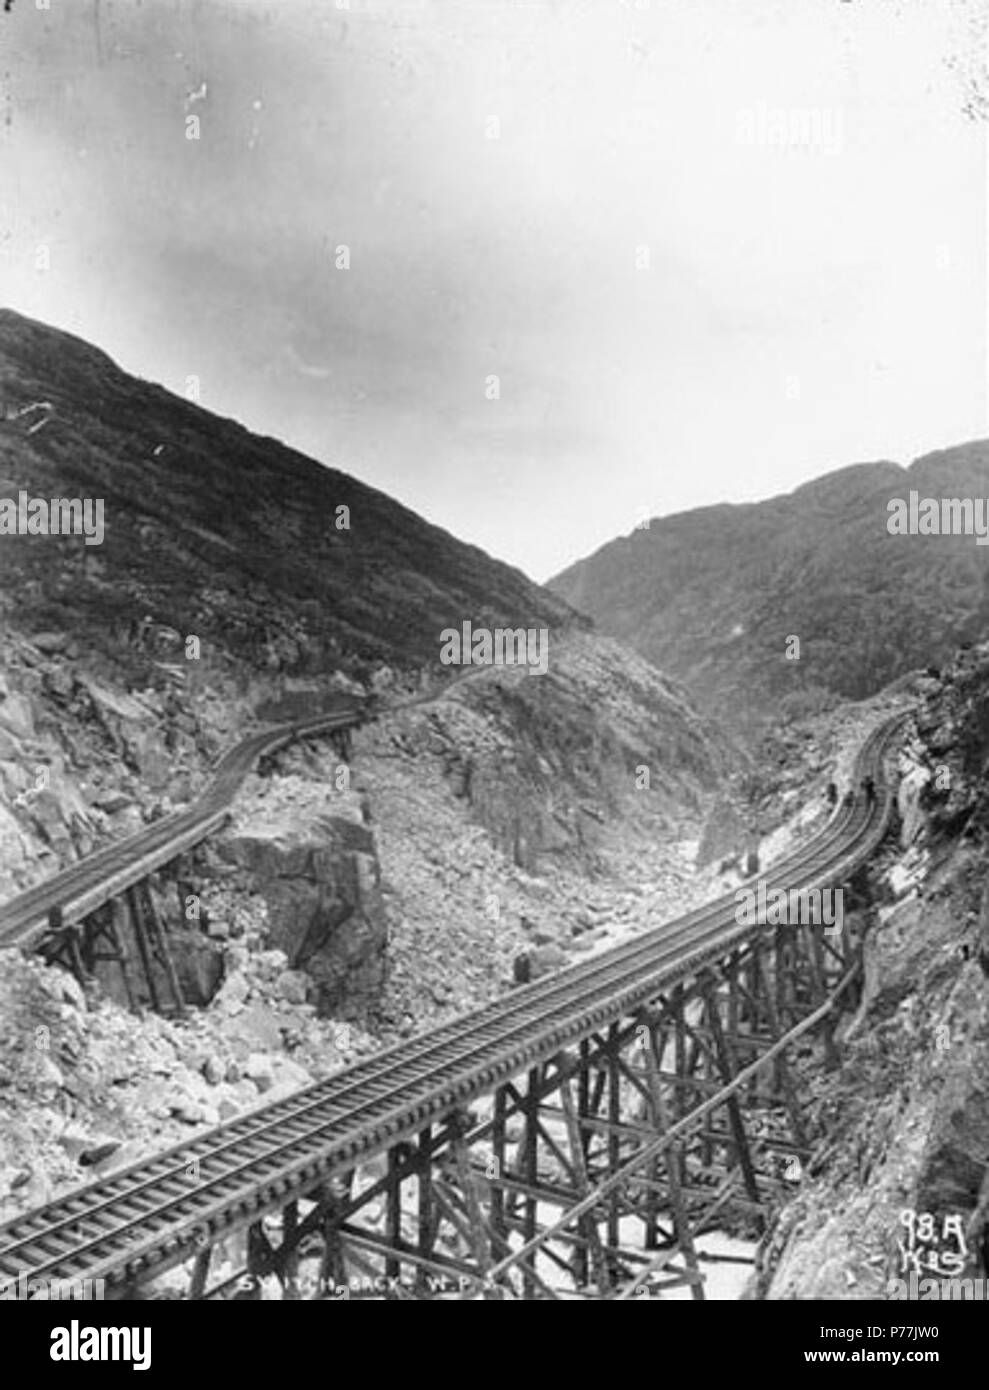 . English: Switchback on the White Pass and Yukon Railroad, Alaska, ca. 1899. English: Caption on image: 'Switch Back W.P. & Y.R.R.' Original image in Hegg Album 3, page 35 . Original photograph by Eric A. Hegg B286; copied by Webster and Stevens 98.A. Subjects (LCTGM): Railroad tracks--Alaska; Trestles--Alaska Subjects (LCSH): White Pass & Yukon Route (Firm)  . circa 1899 12 Switchback on the White Pass and Yukon Railroad, Alaska, ca 1899 (HEGG 490) Stock Photo